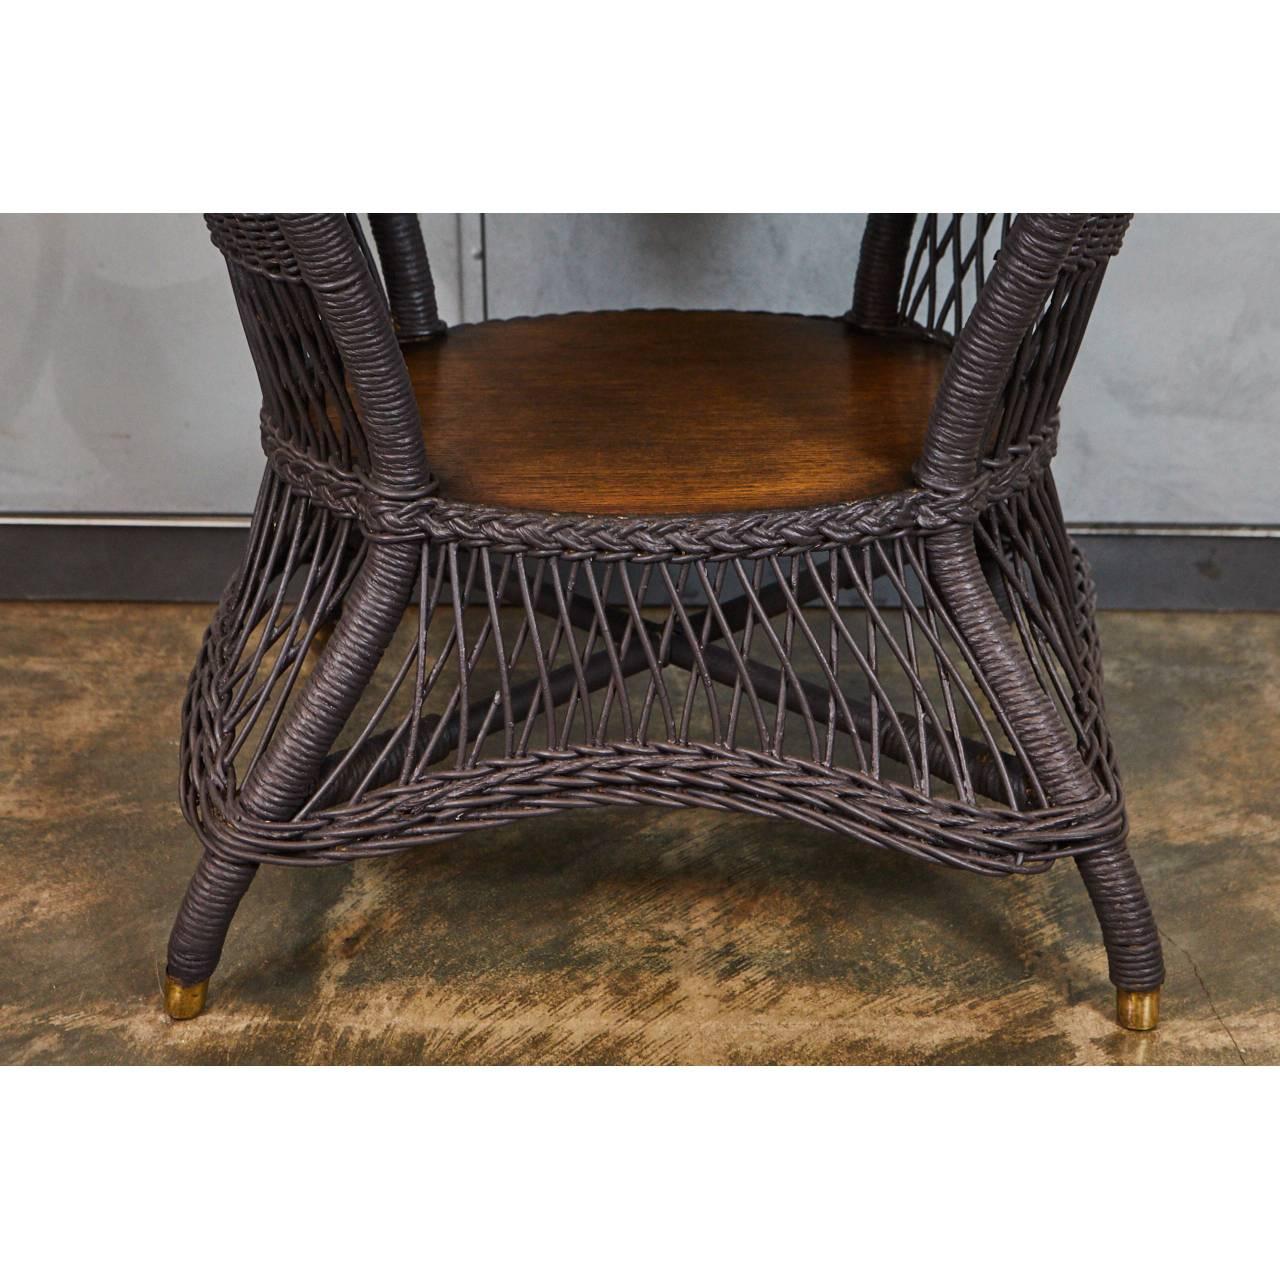 Country Oval Wicker Table